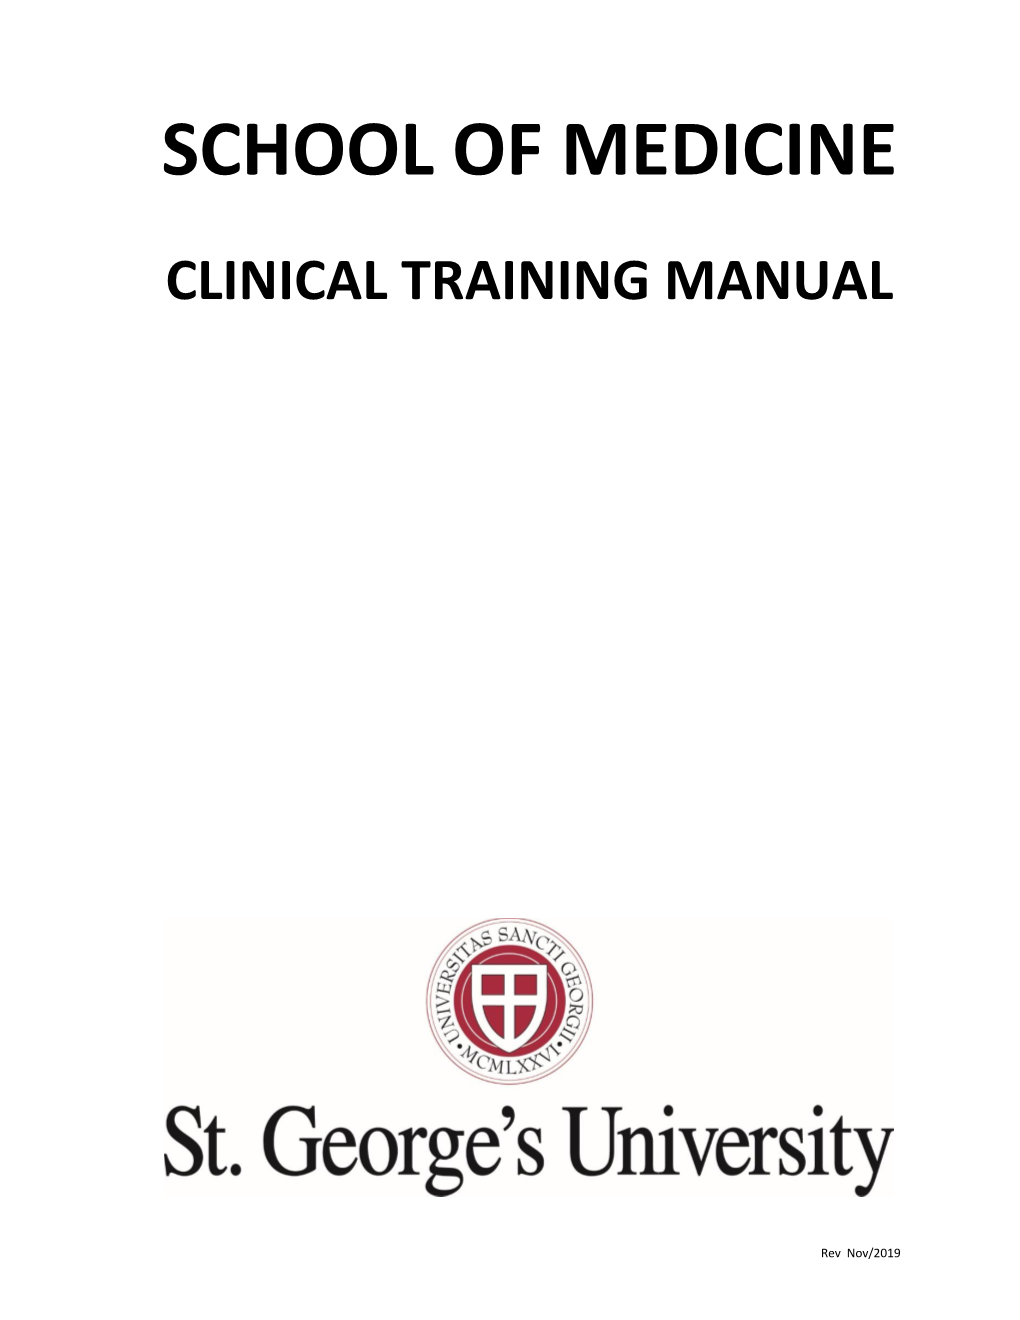 Clinical Training Manual